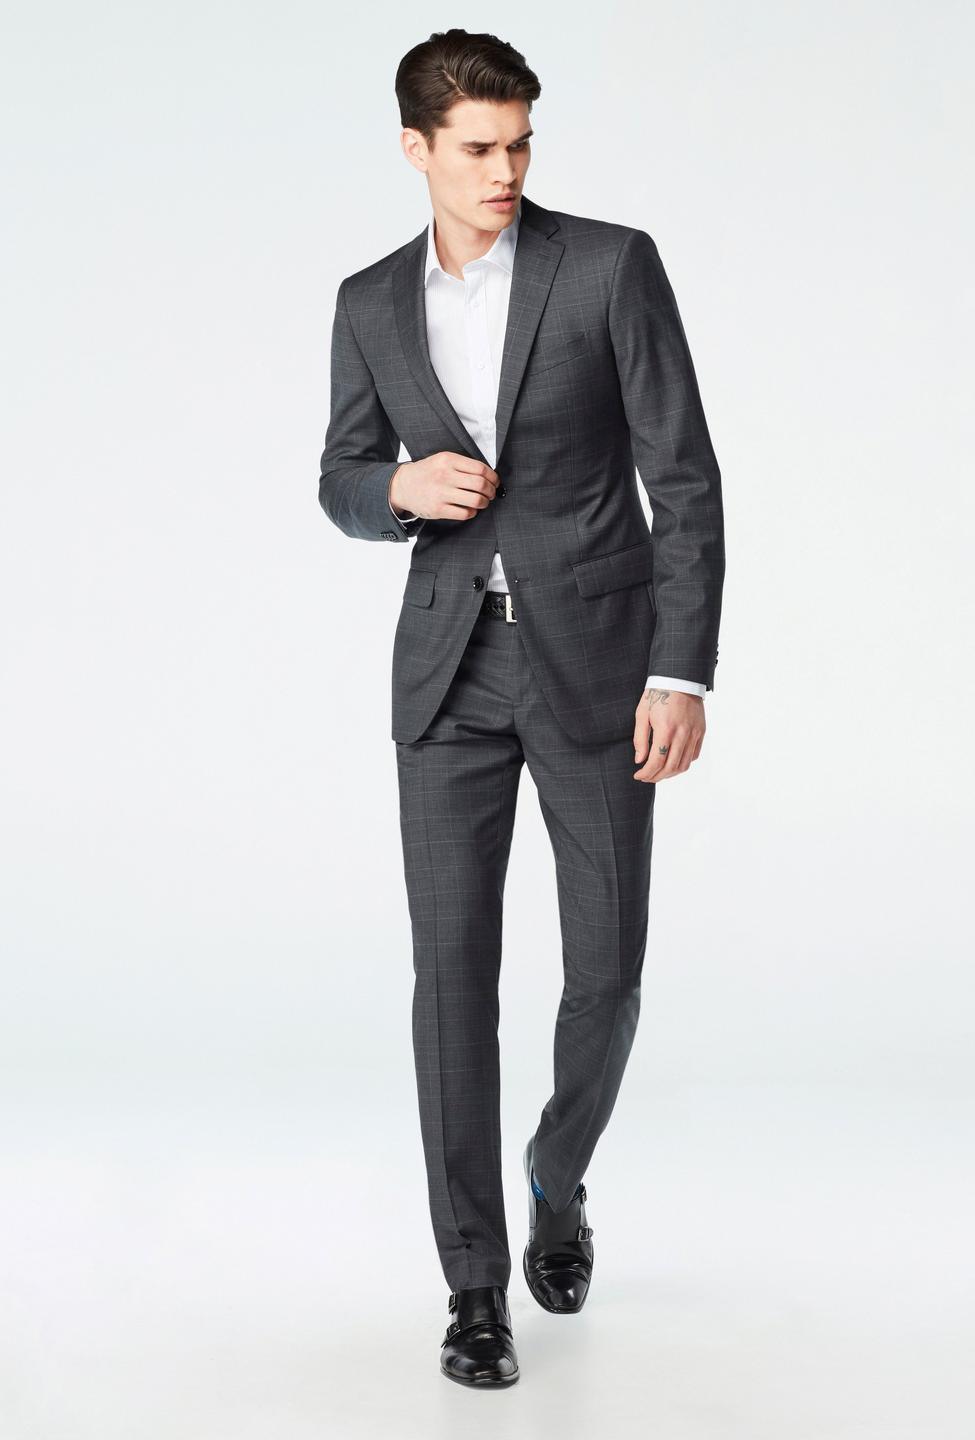 Gray suit - Hemsworth Plaid Design from Premium Indochino Collection